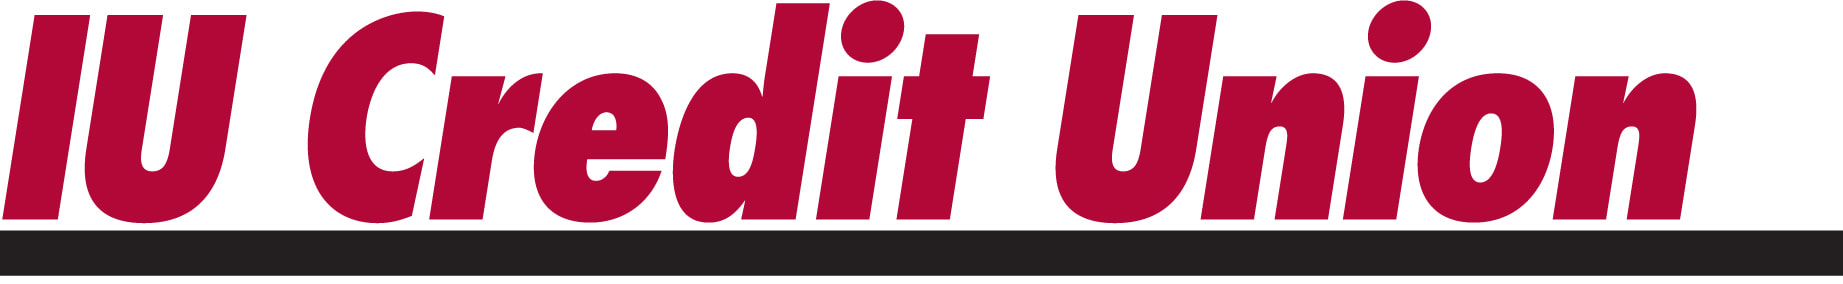 Logo of IU Credit Union, featuring bold red uppercase letters 'IU' followed by 'Credit Union' in a streamlined red font, all set above a black horizontal line, emphasizing a sleek and modern design.